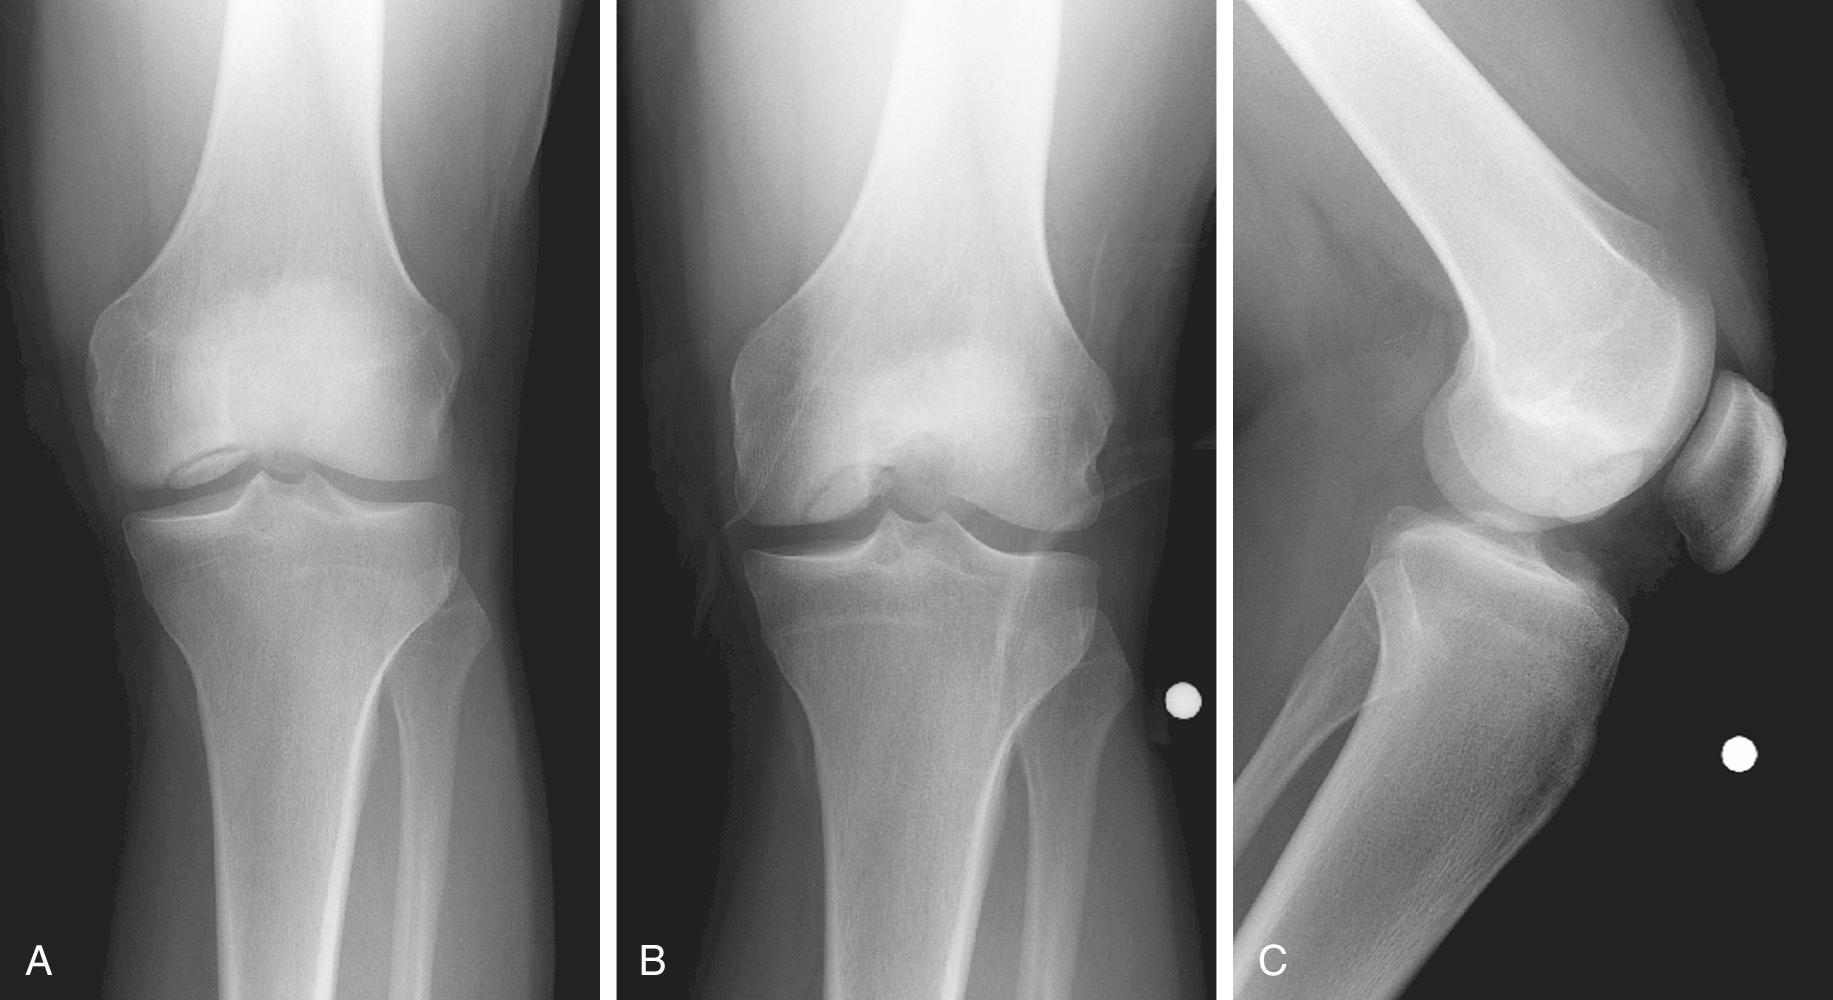 FIG 28.1, Radiograph of an Osteochondritis Dissecans (OCD) Lesion in the Classic Location of the Lateral Aspect of the Medial Femoral Condyle (MFC)